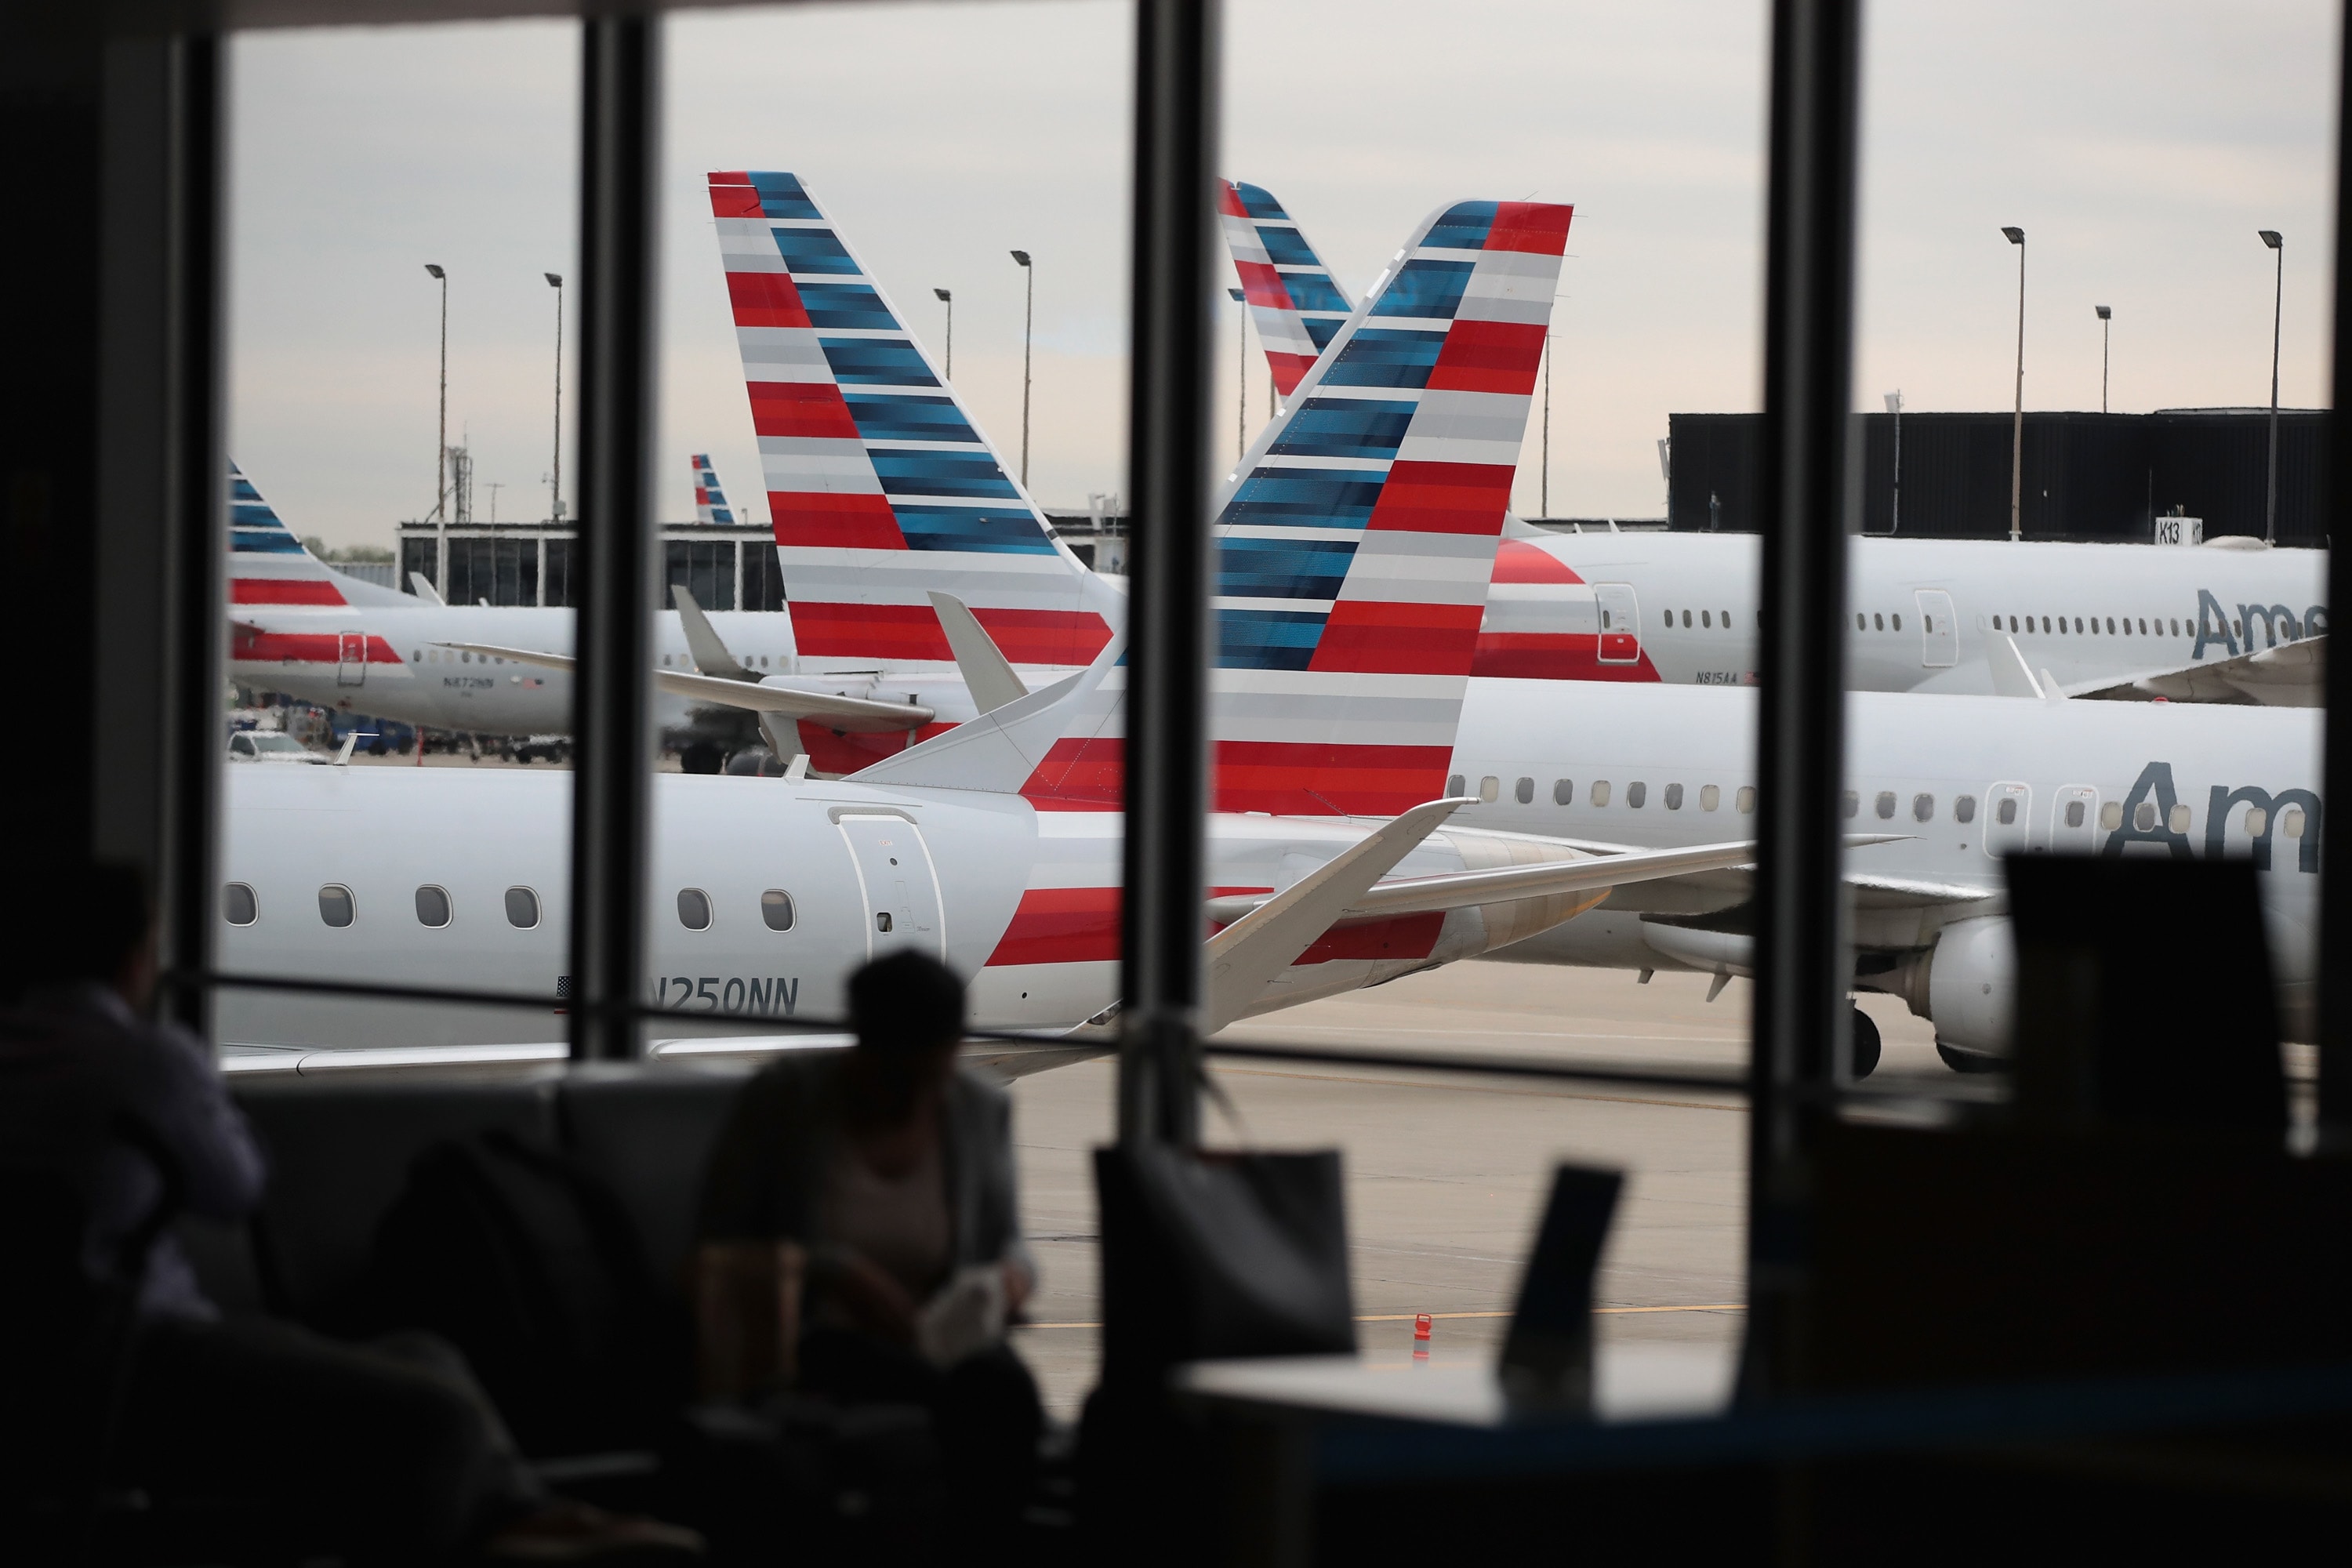 American Airlines apologizes for summer travel disruptions with miles